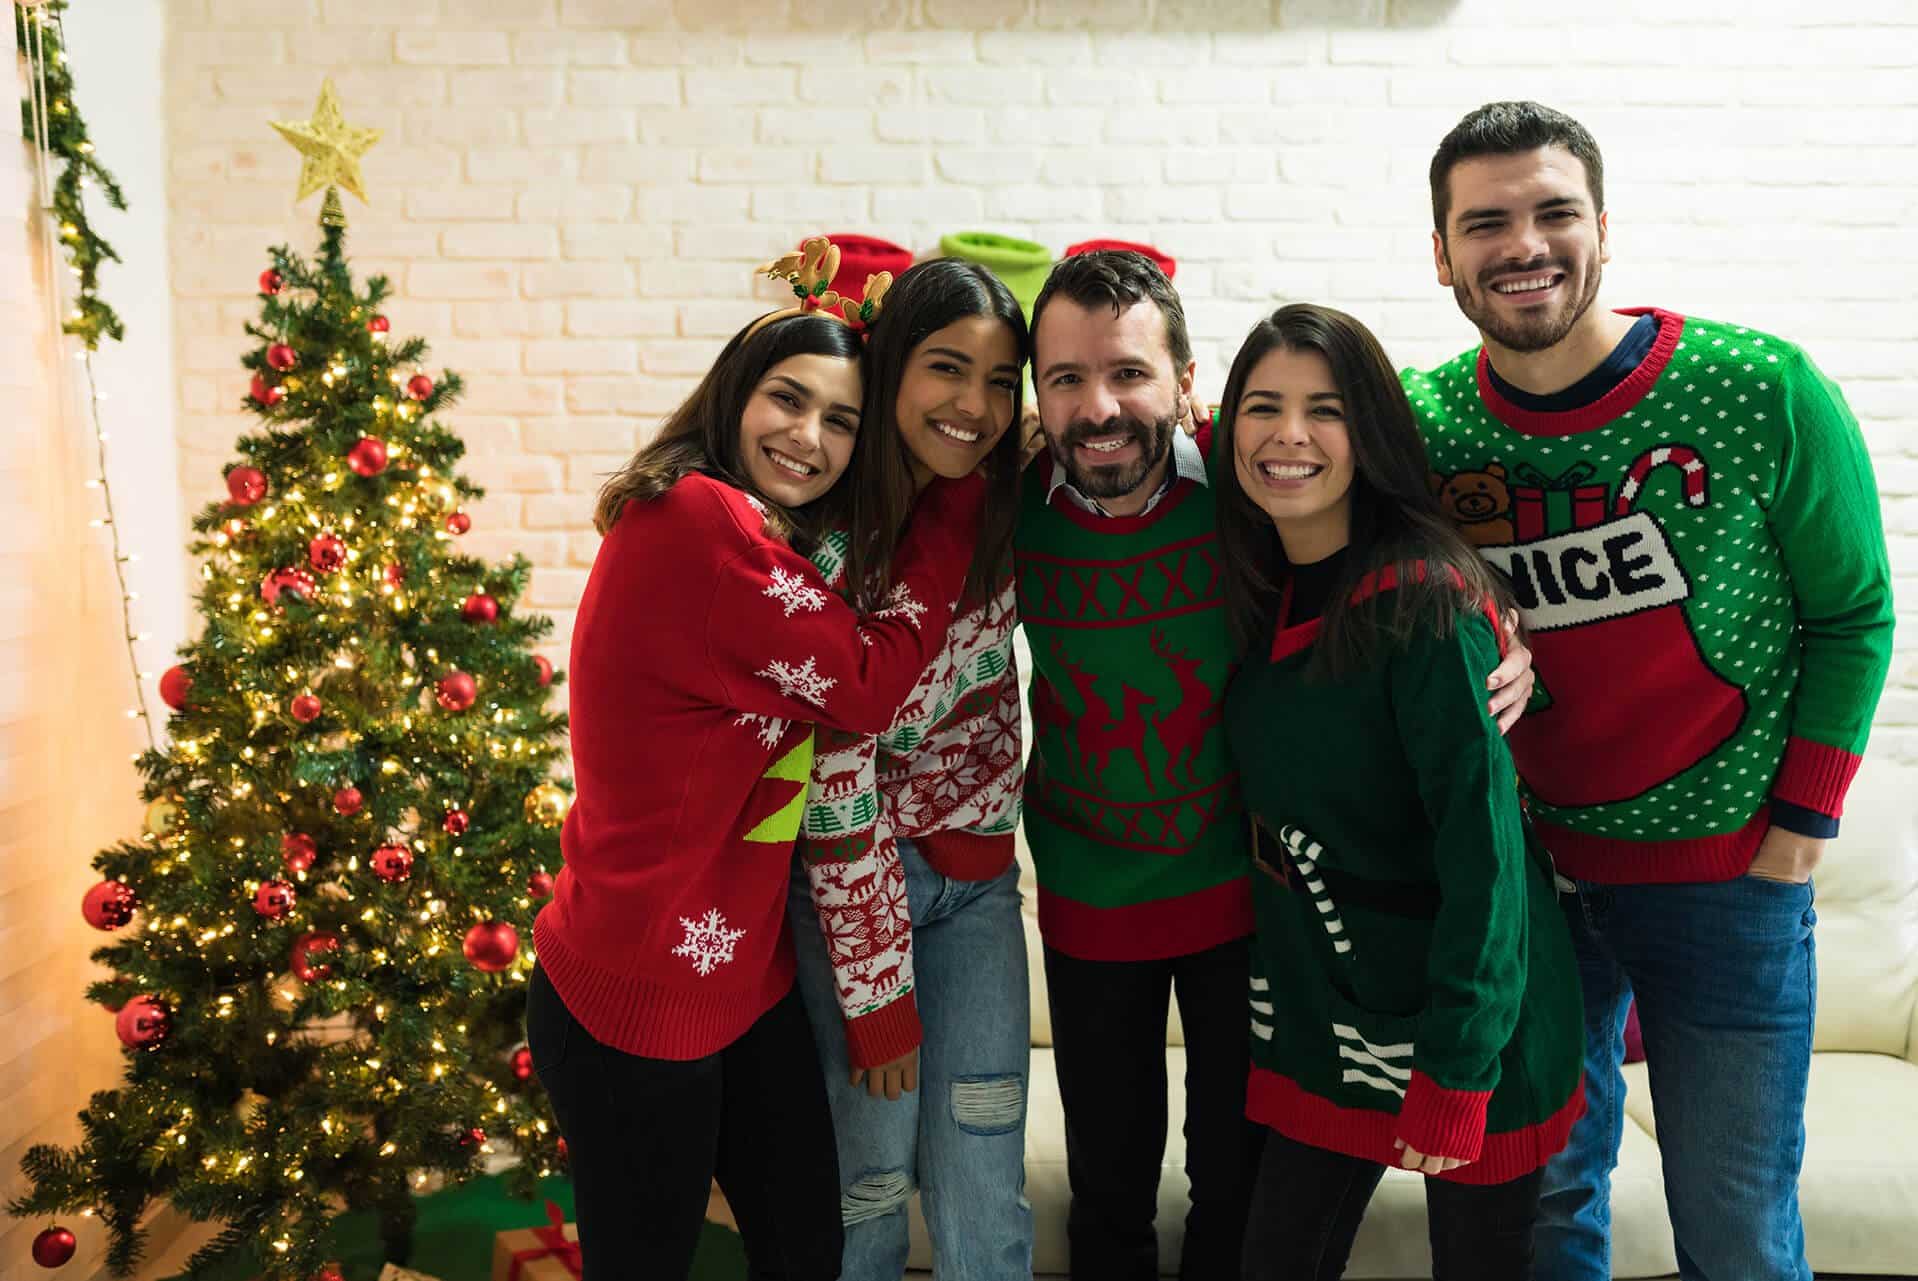 Ugly Christmas sweater party